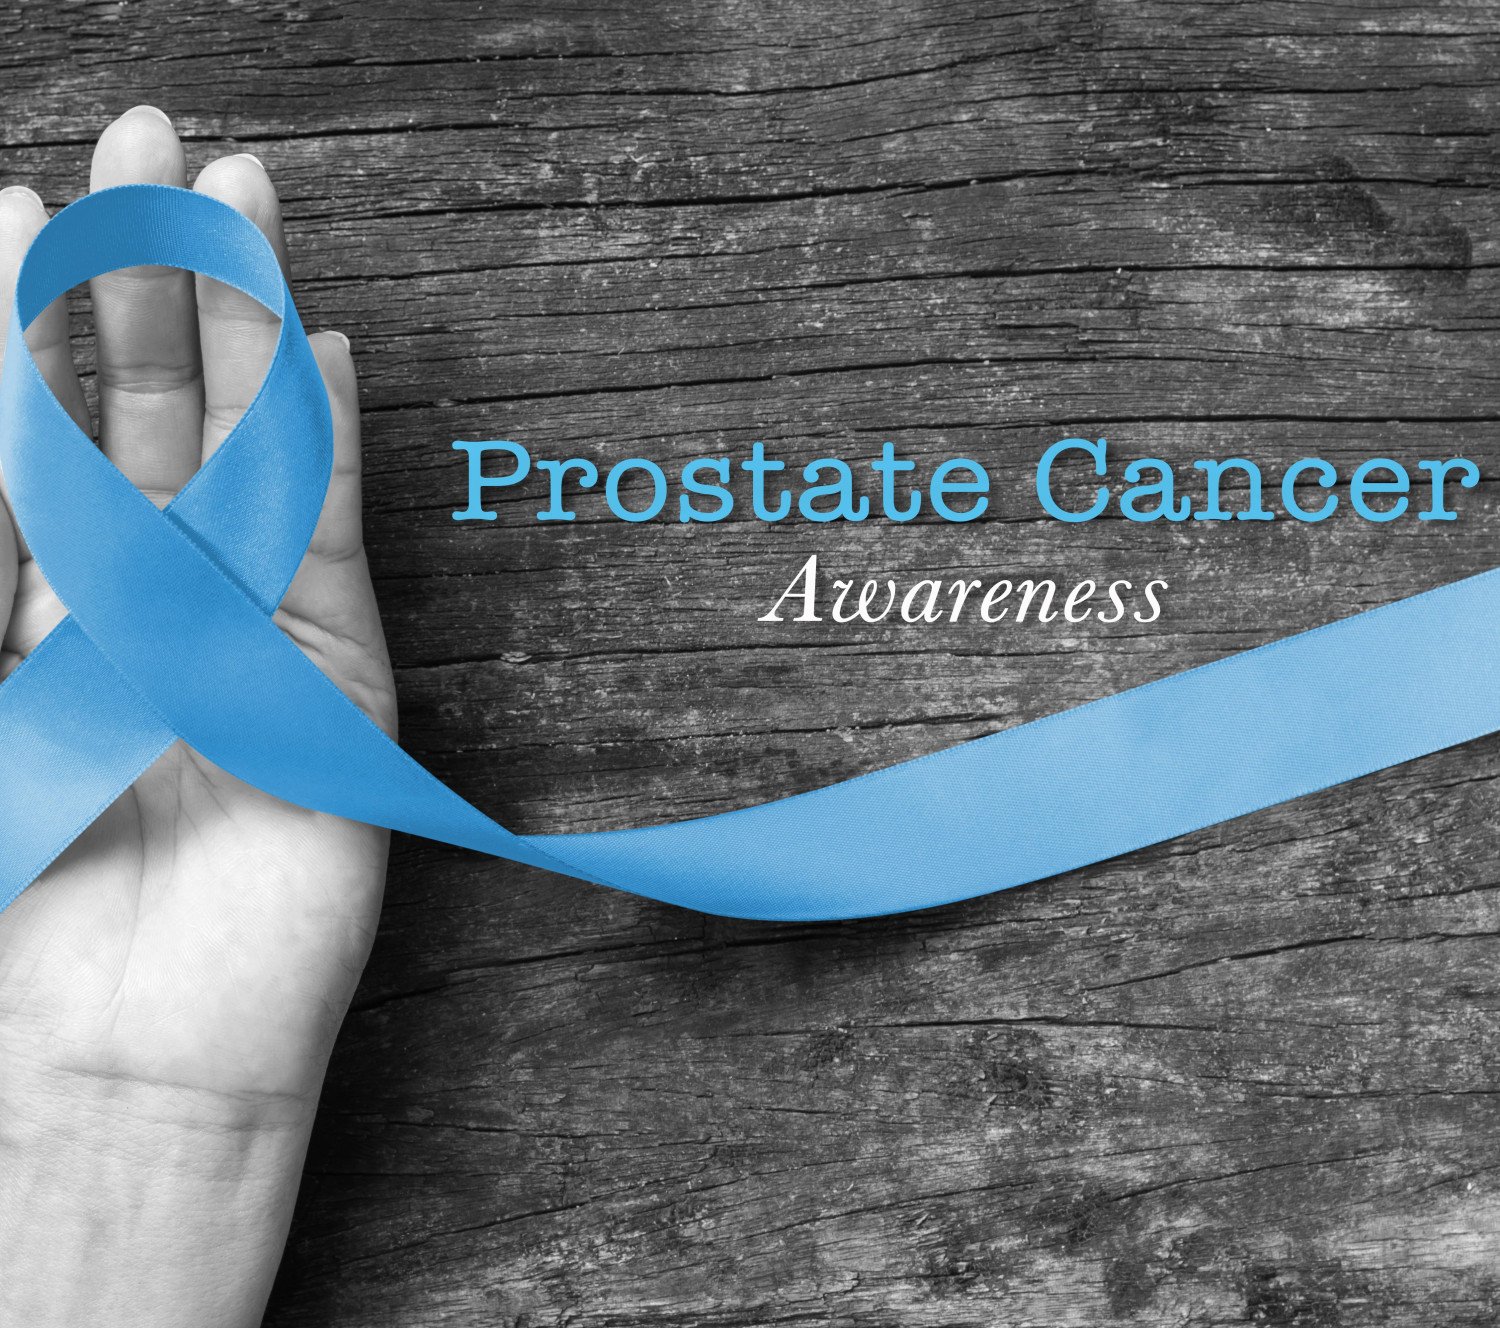 Prostate Cancer Treatment: The Best Options